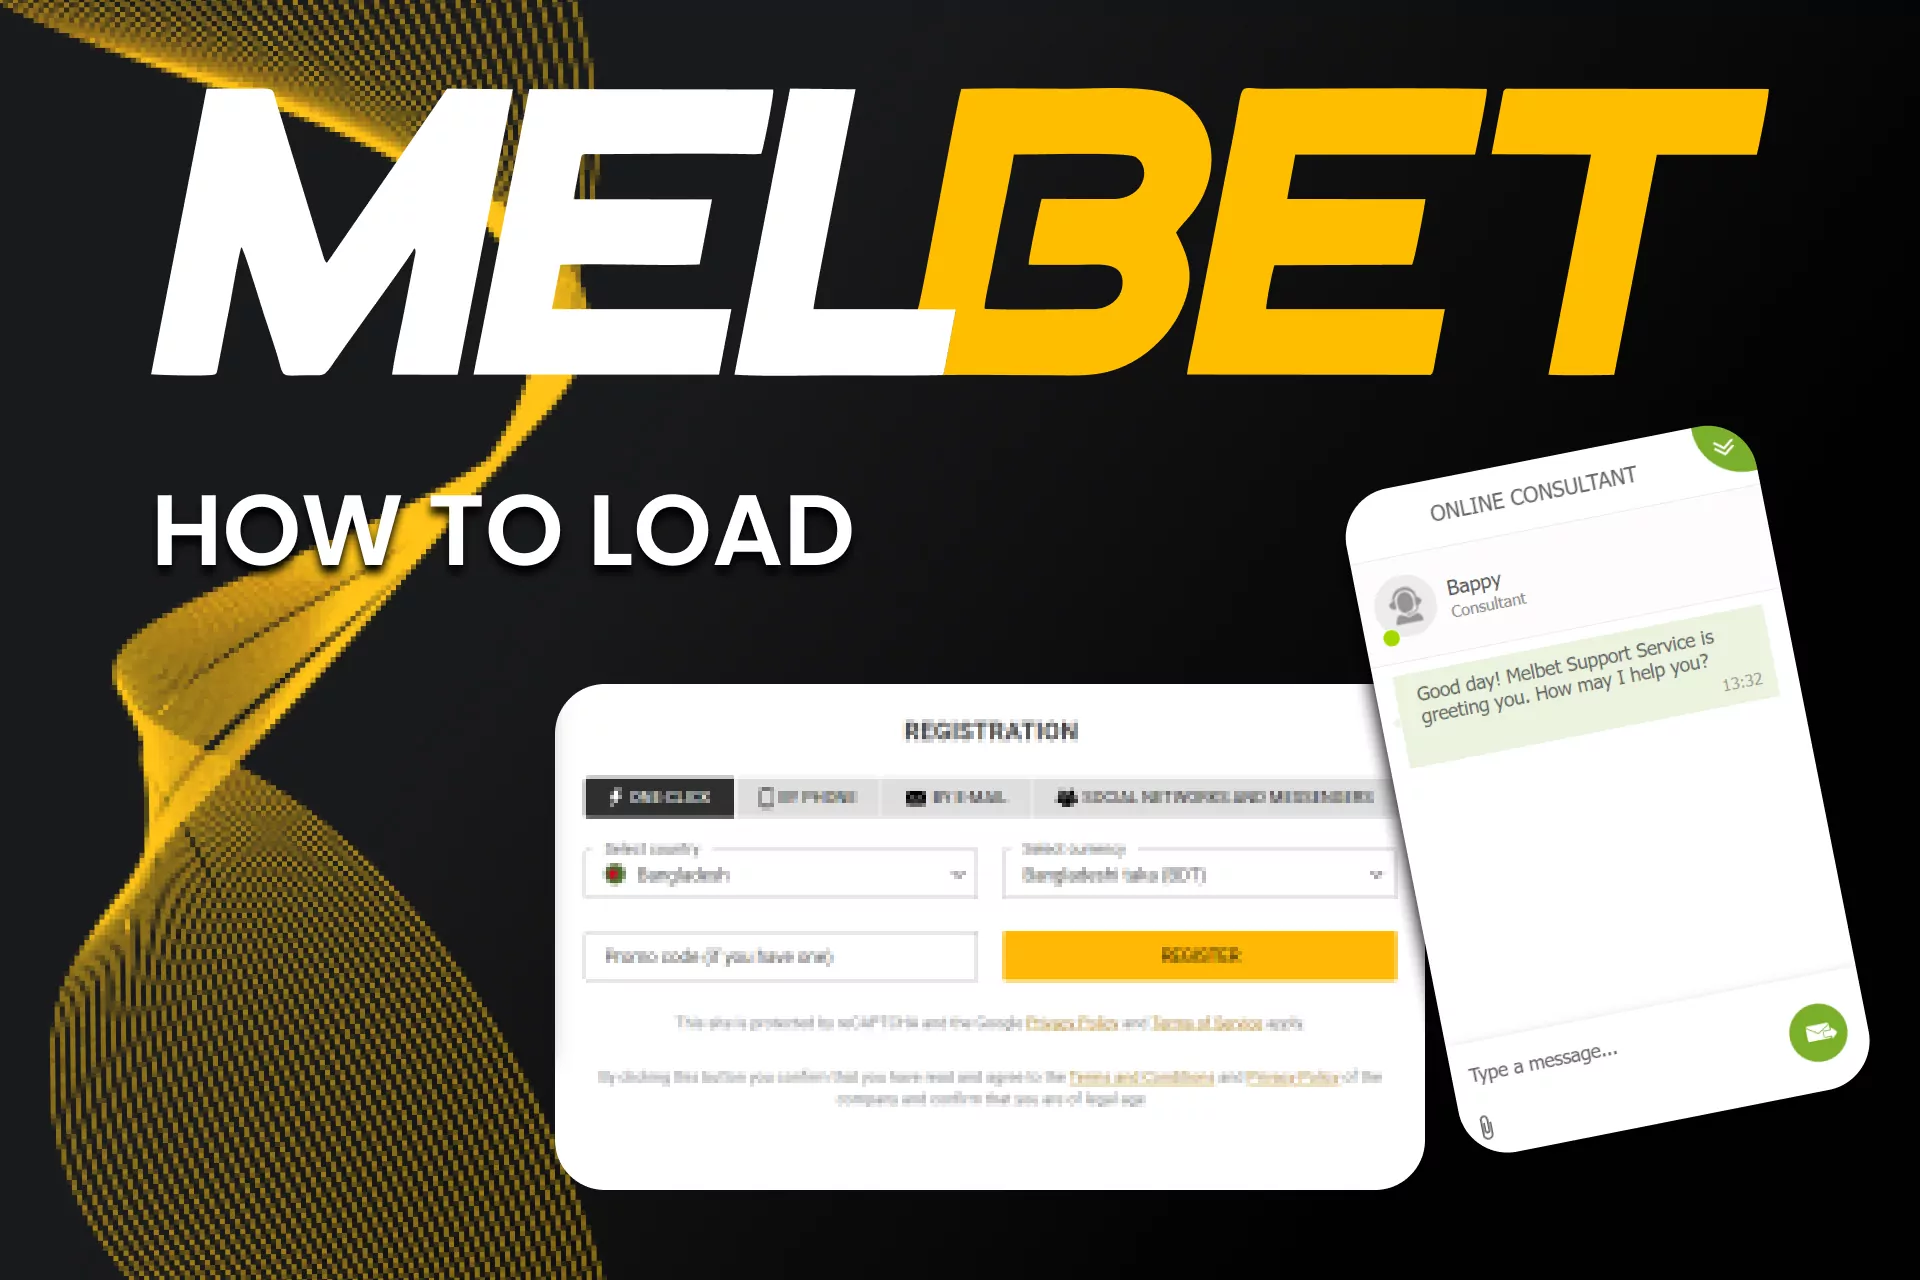 Use the betting code from Melbet.